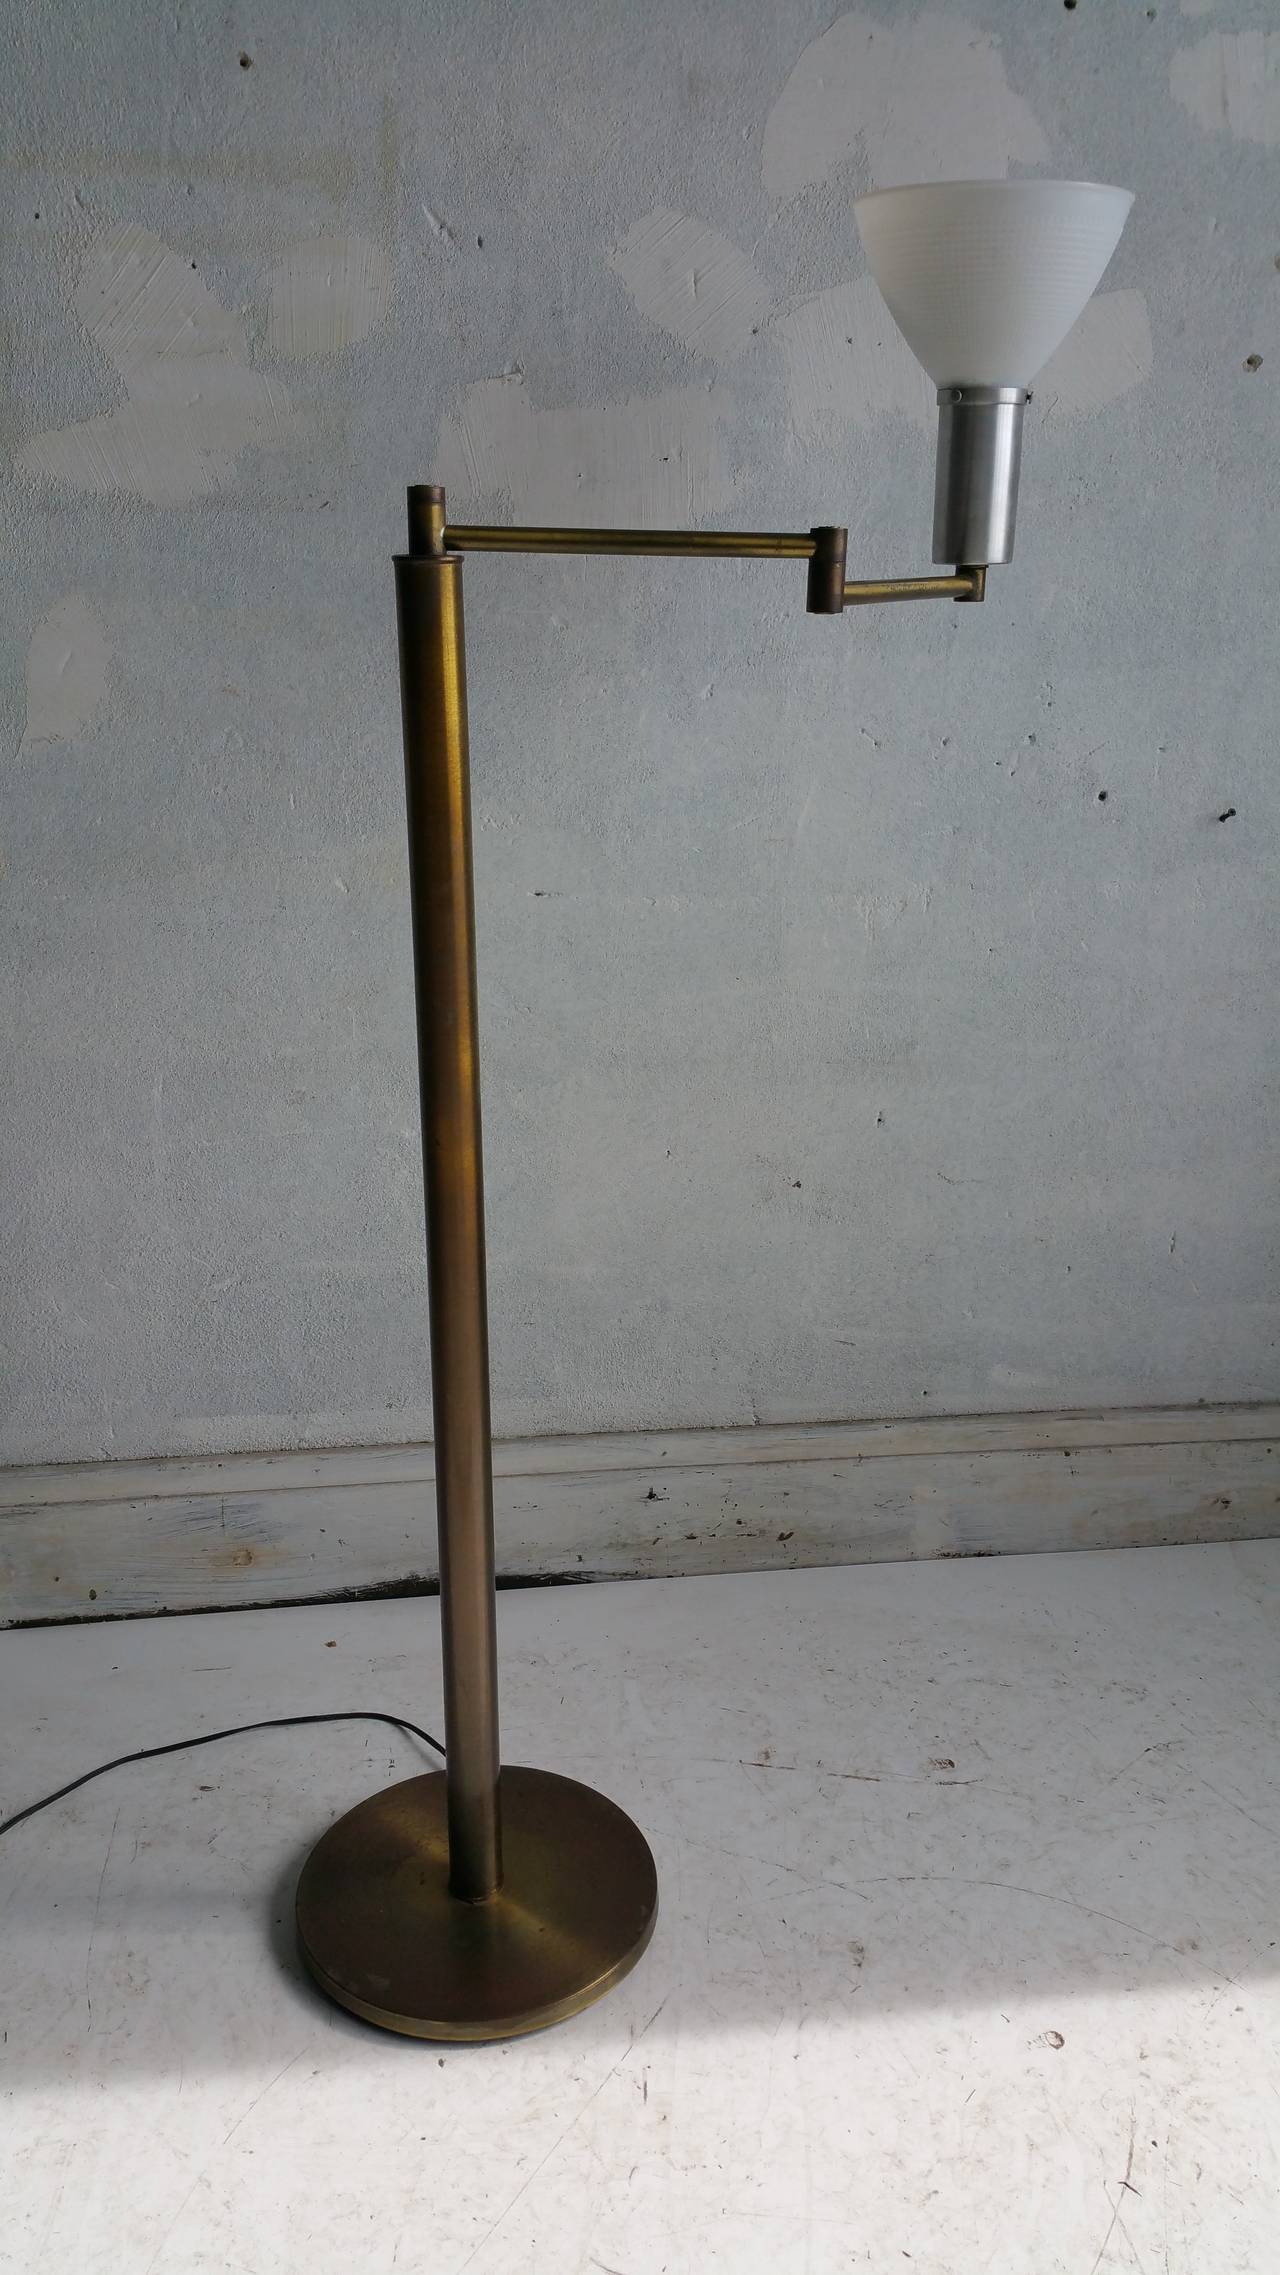 Rare and important,,,,,very early 1930s Classic Swing-arm Lamp designed by Walter Von nessen,,,made in New York City,at Nessen Studios .note the unusual pivot mechanism ,Drop down second arm design,,also the use of mixed metals,,,,,,,,,,,,,,        